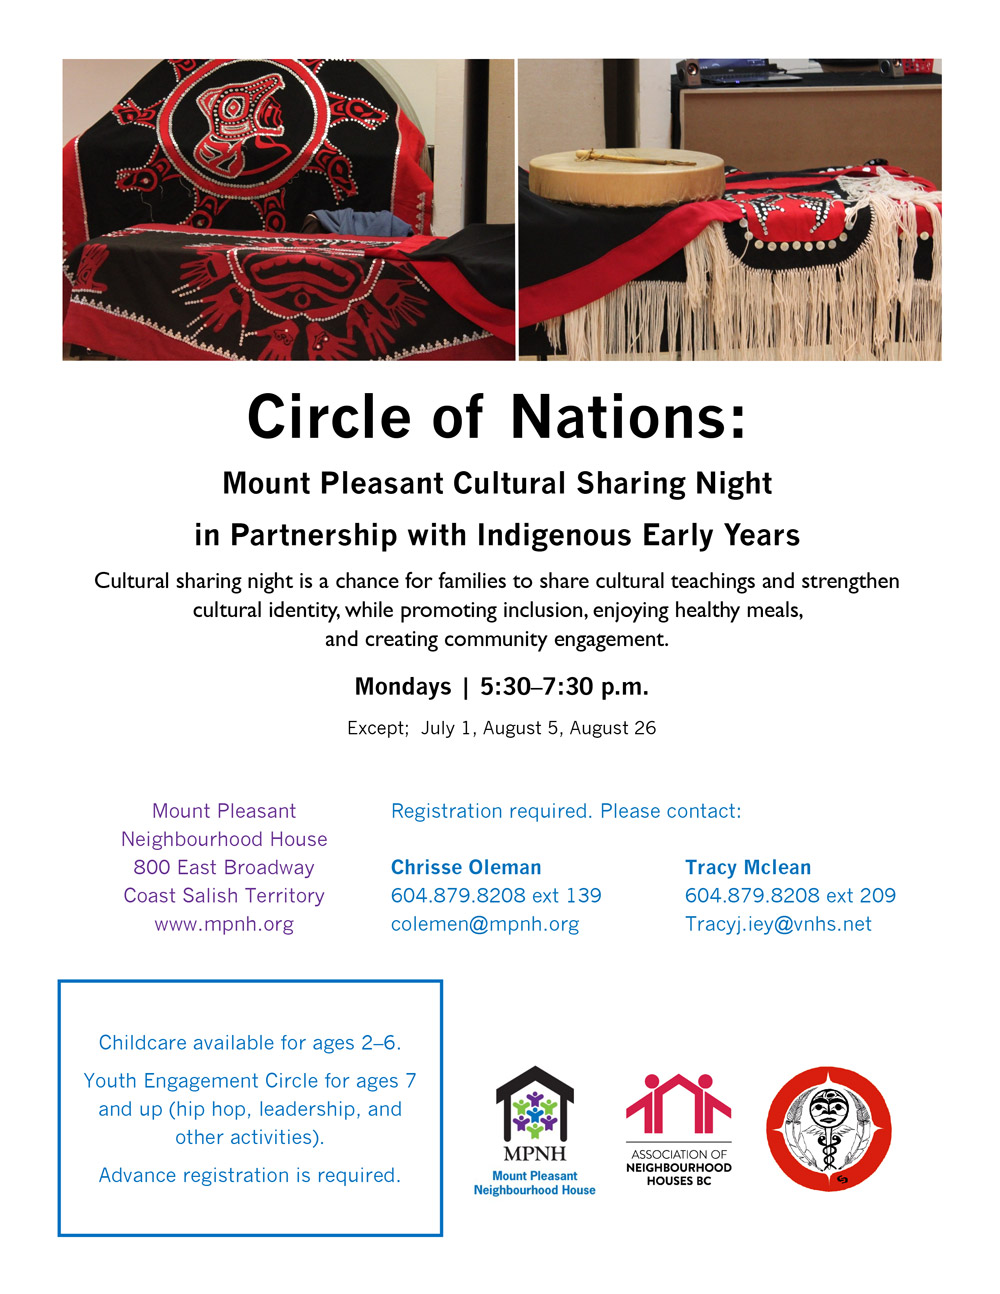 An image of the poster with event details, featuring images of button blankets, a drum, and clothing from different nations.